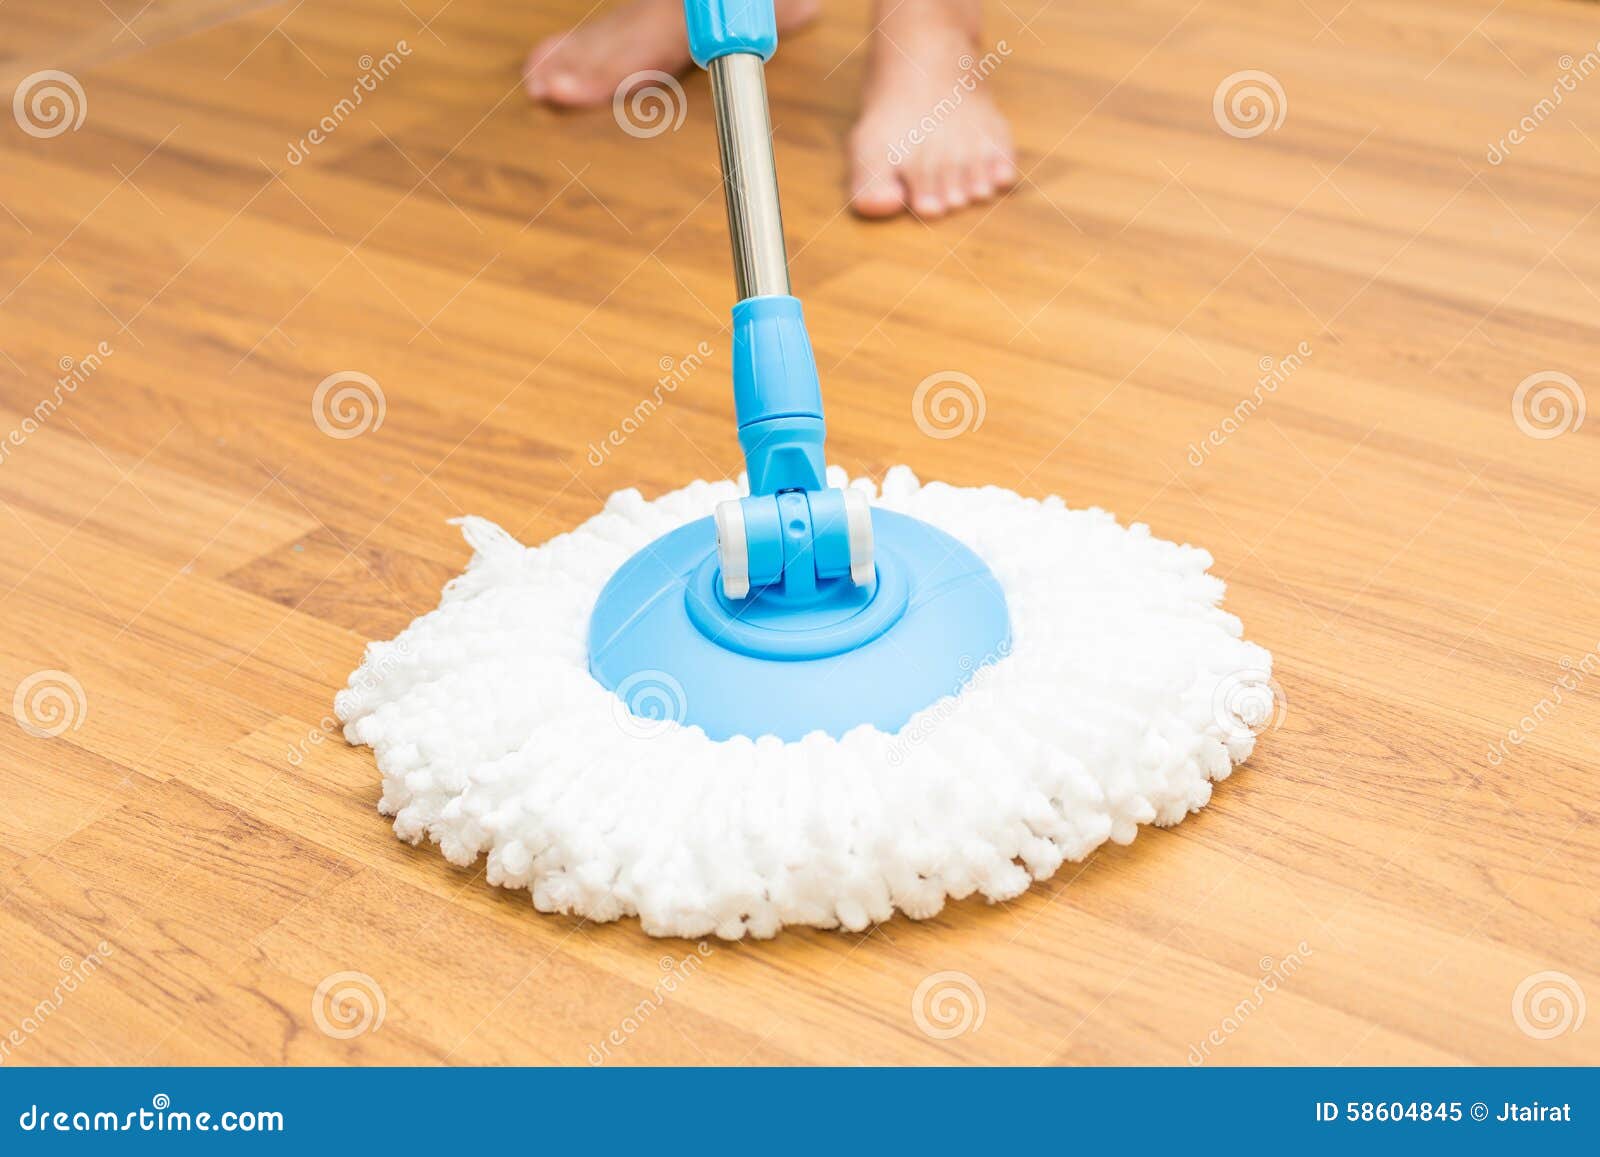 Cleaning Wood Floor By Modern Mop Stock Image Image Of Tool